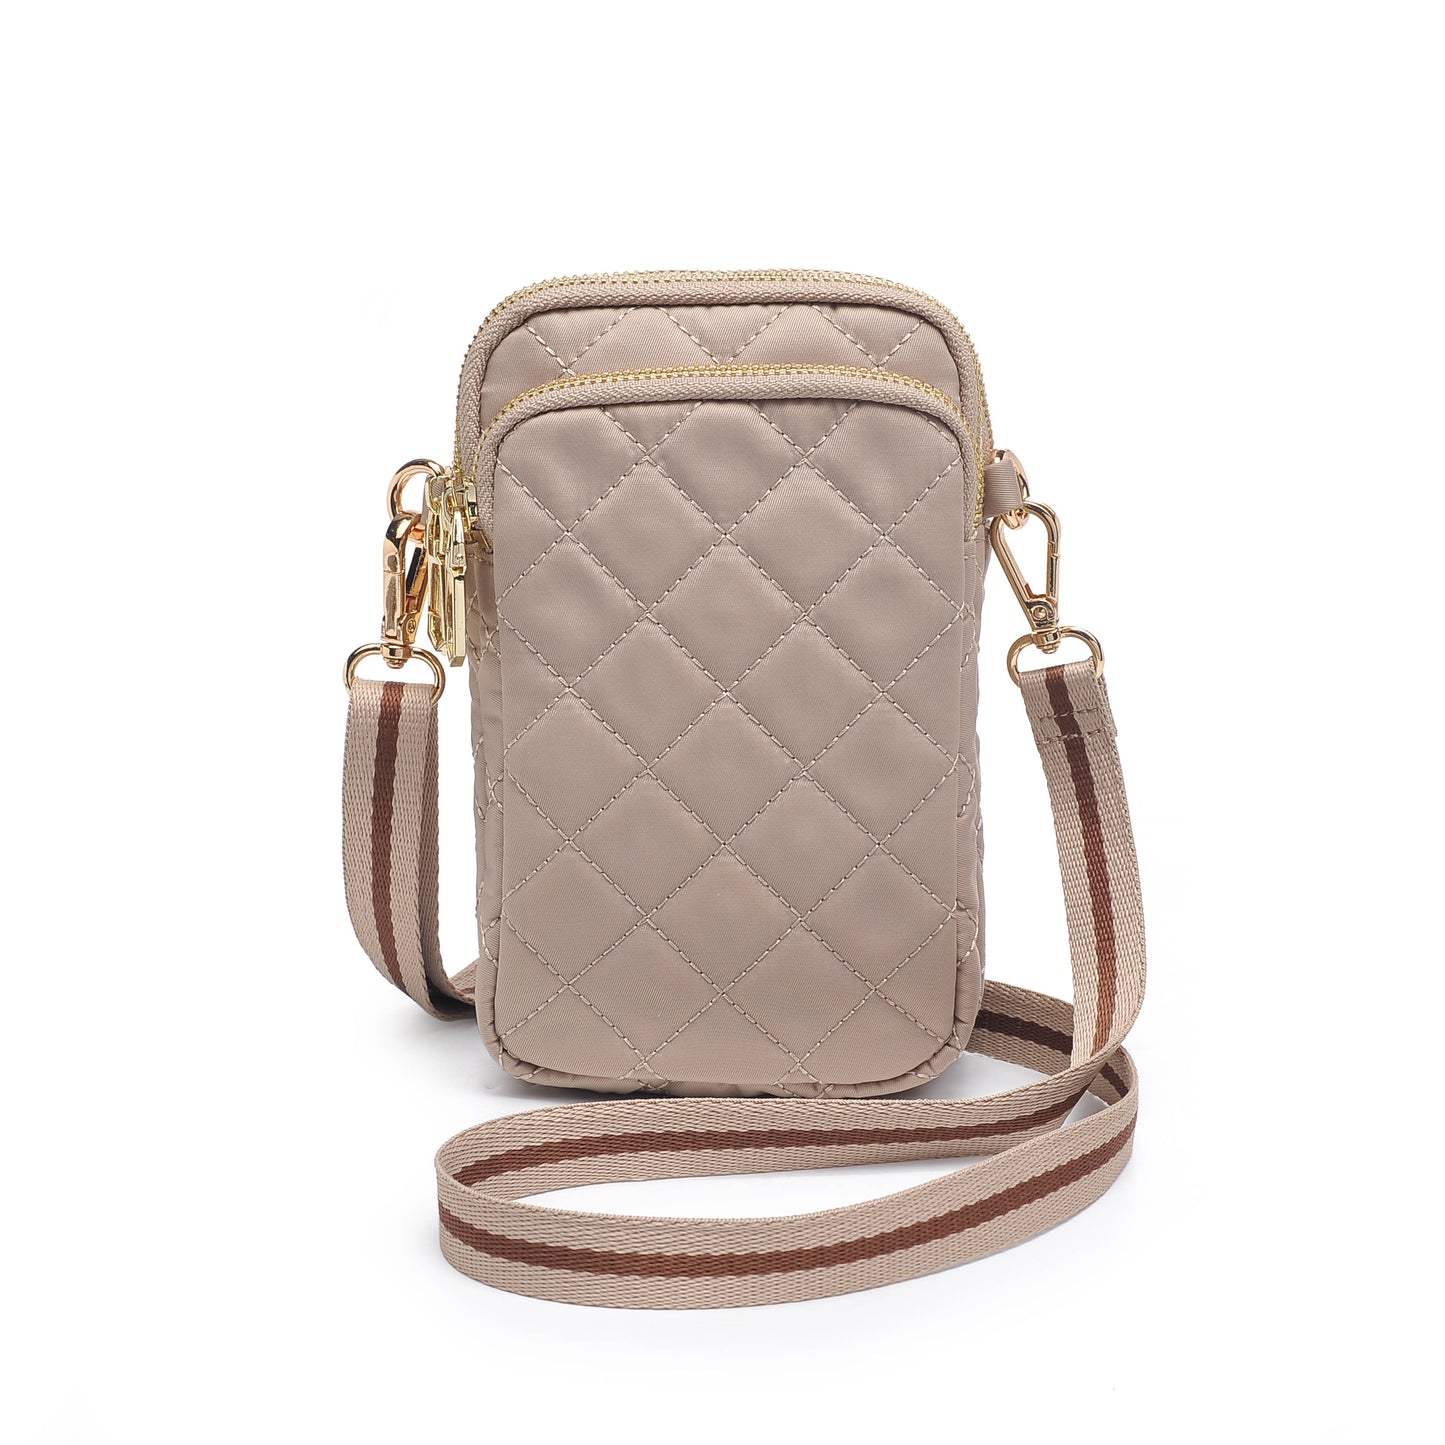 Sol and Selene - Divide & Conquer Quilted Crossbody: Black nude cream